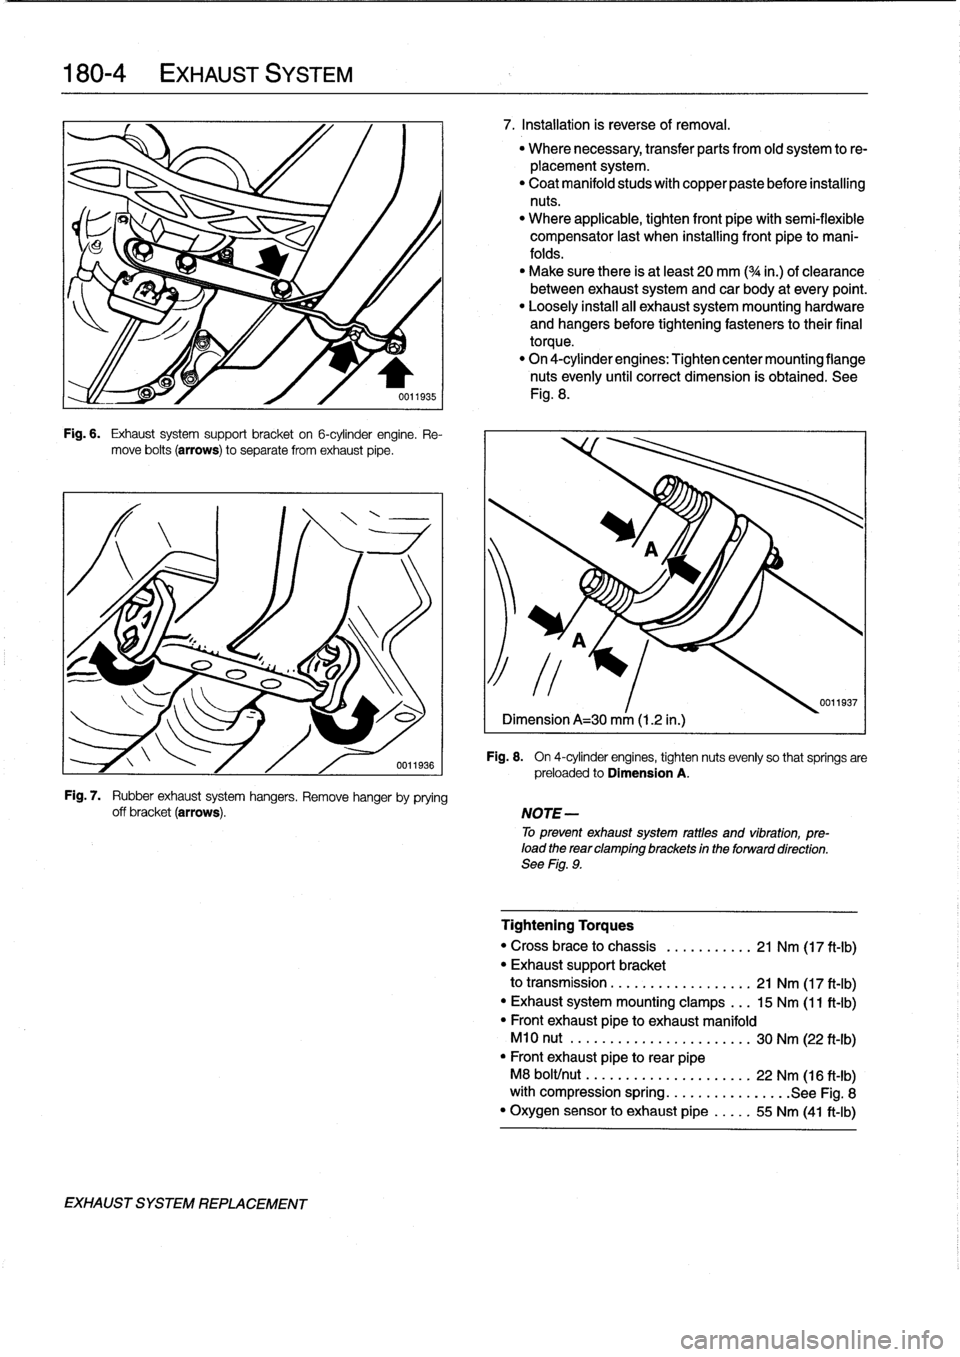 BMW 318i 1997 E36 Workshop Manual 
180-
4

	

EXHAUST
SYSTEM

Fig
.
6
.

	

Exhaust
system
support
bracket
on
6-cylinder
engine
.
Re-
move
bolts
(arrows)
to
separate
from
exhaust
pipe
.

Fig
.
7
.

	

Rubber
exhaust
system
hangers
.
R